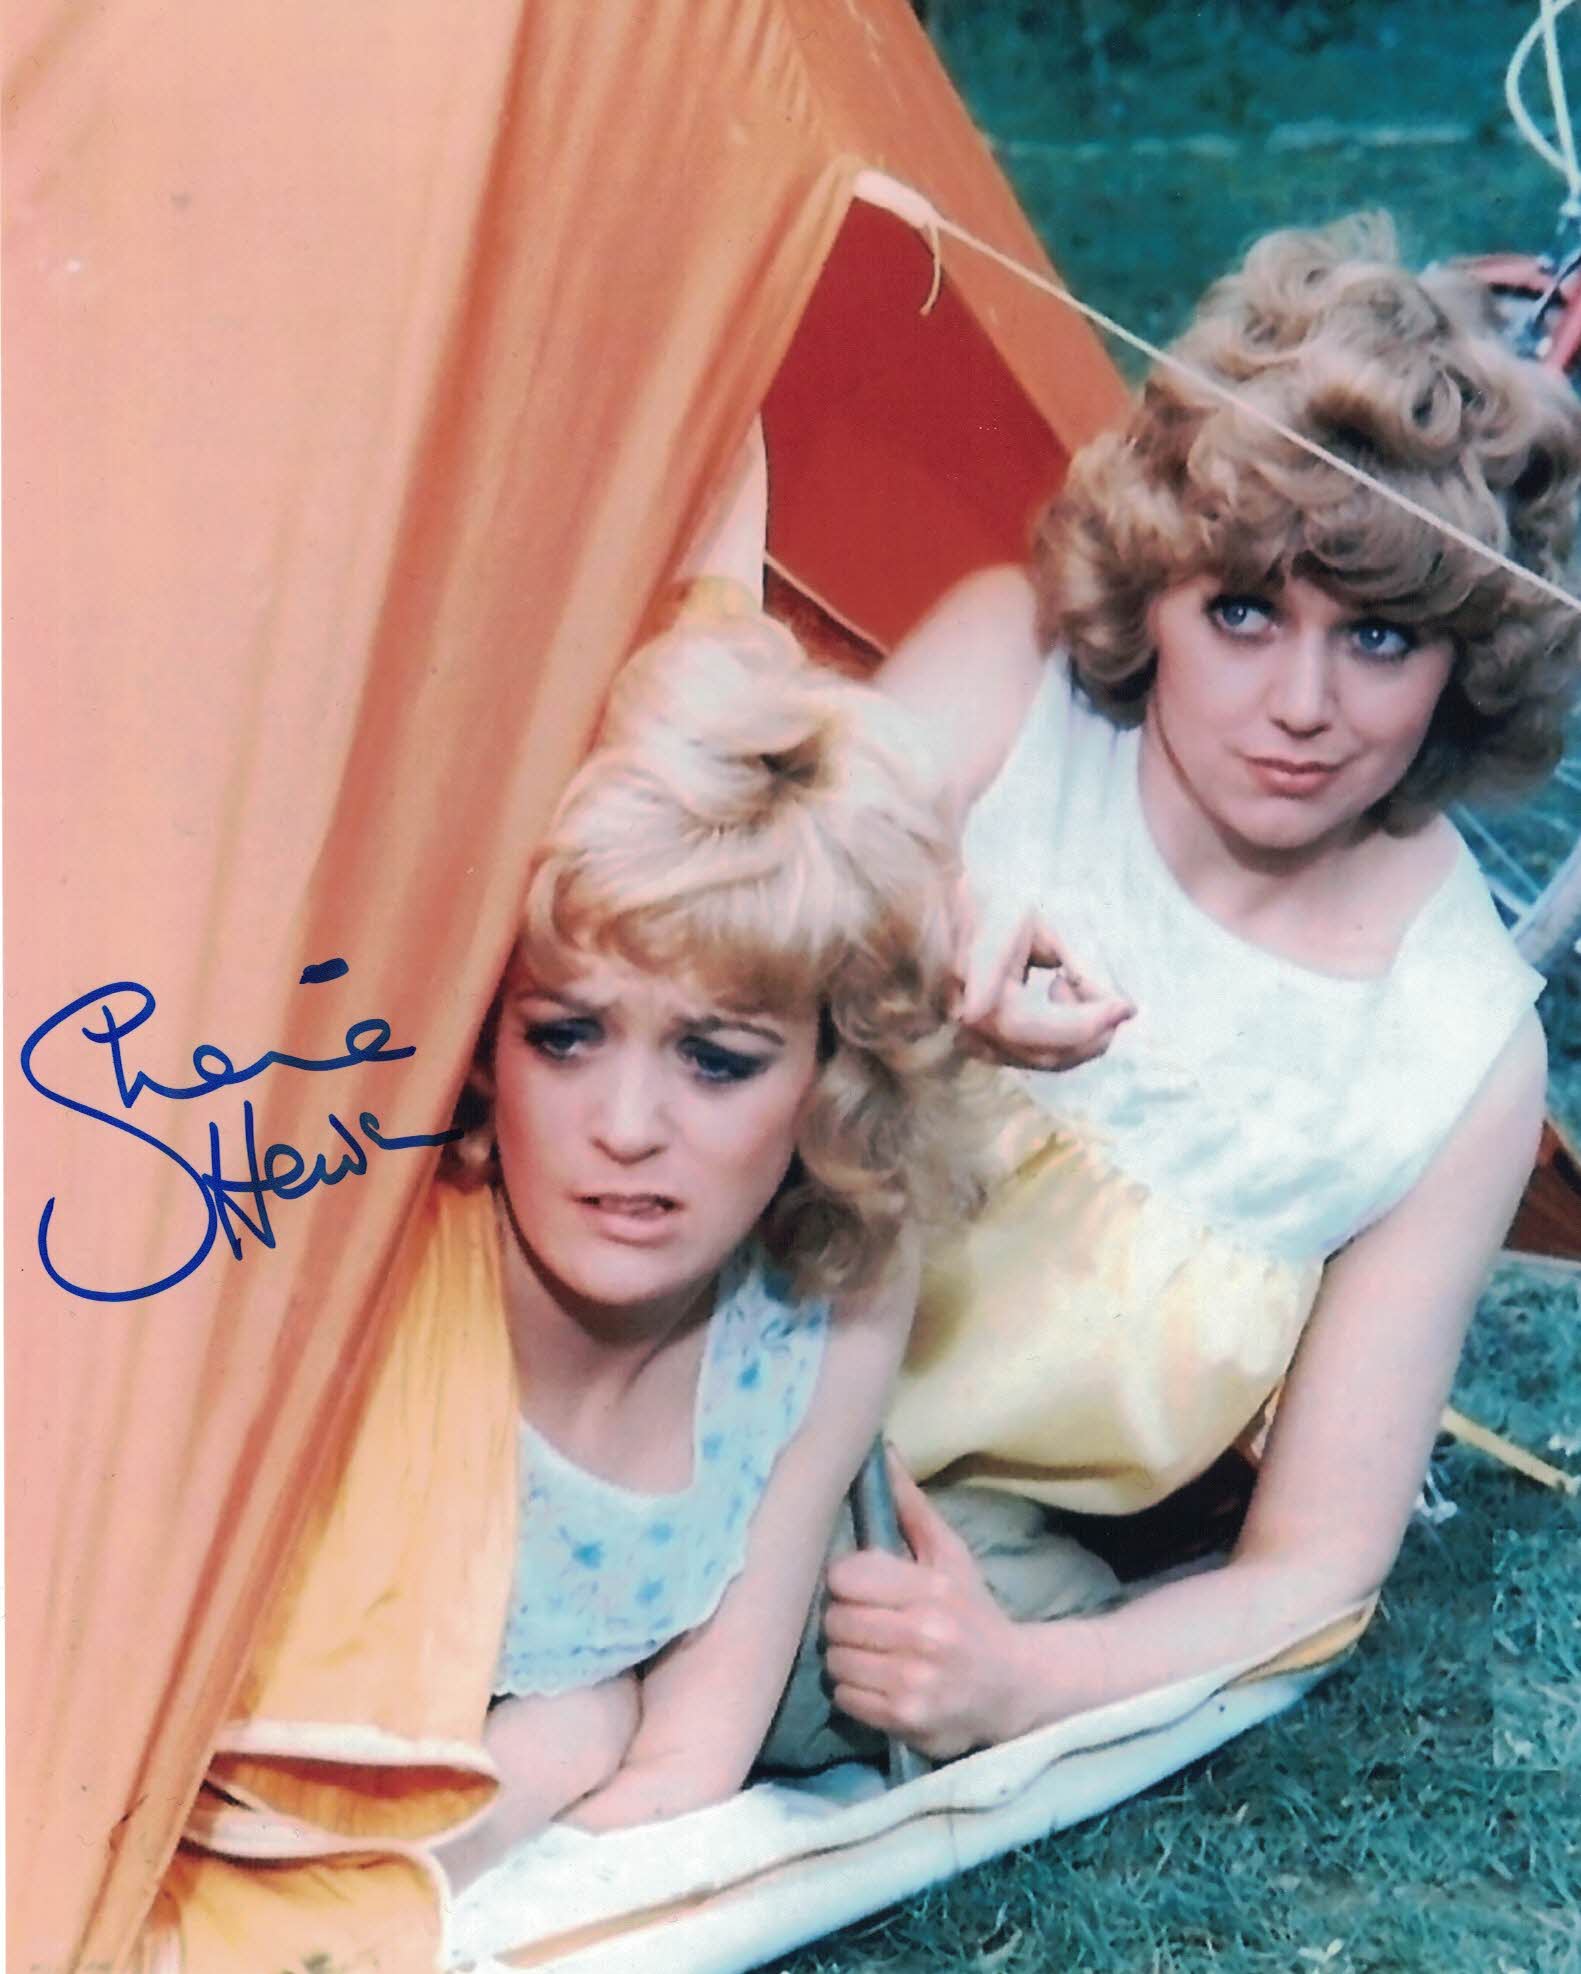 SHERRIE HEWSON - Carol in Carry on Behind - hand  signed 10 x 8 photo